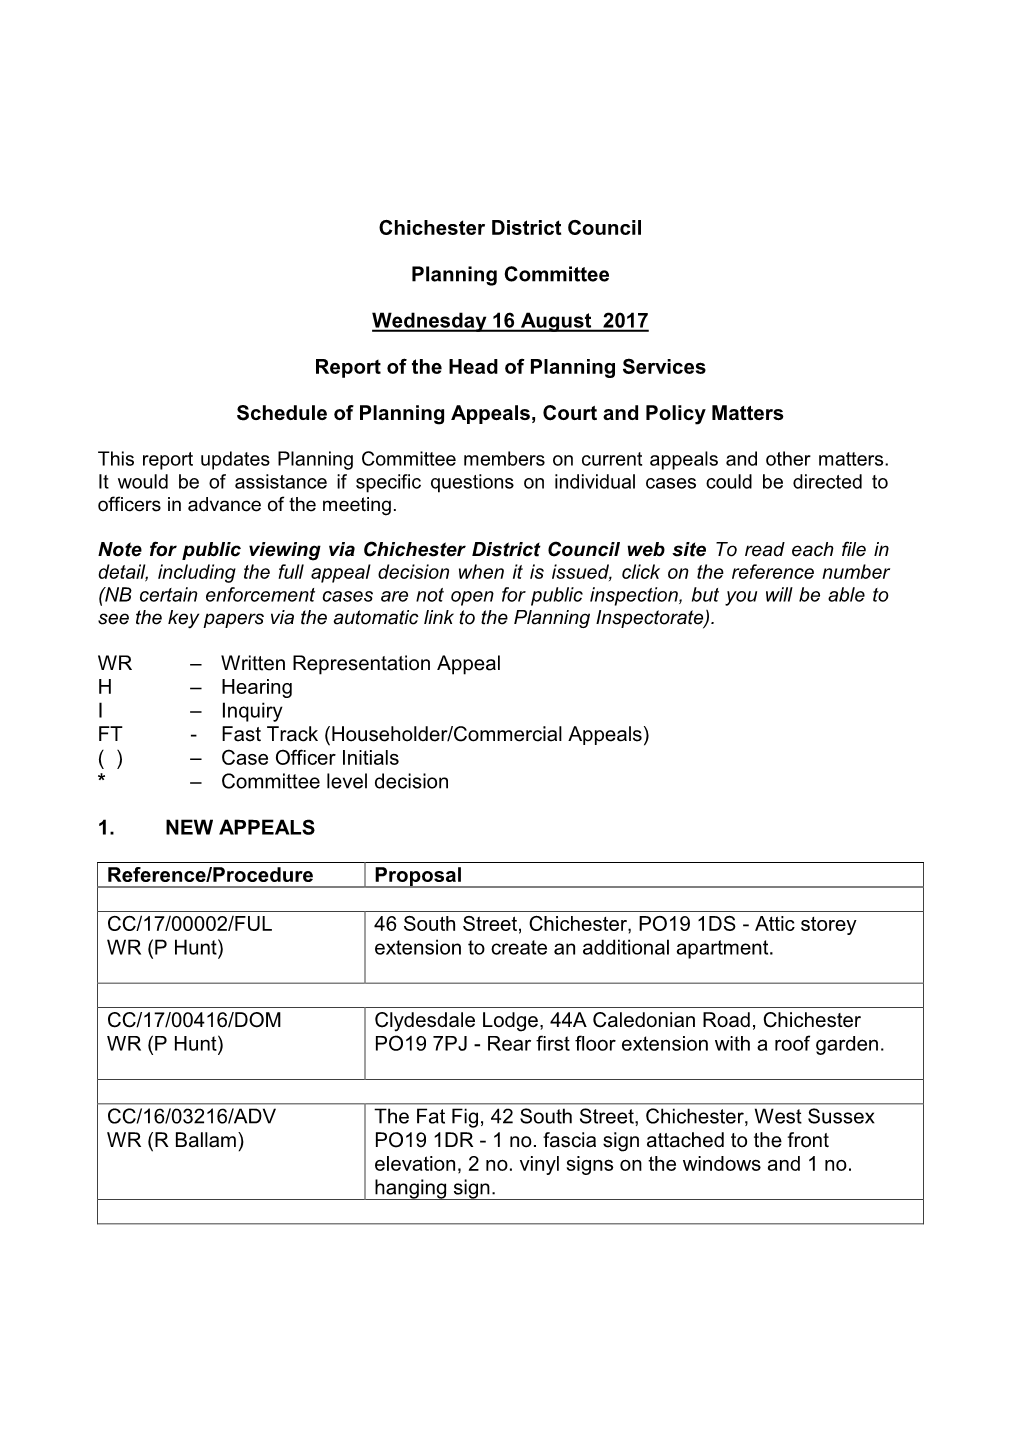 Chichester District Council Planning Committee Wednesday 16 August